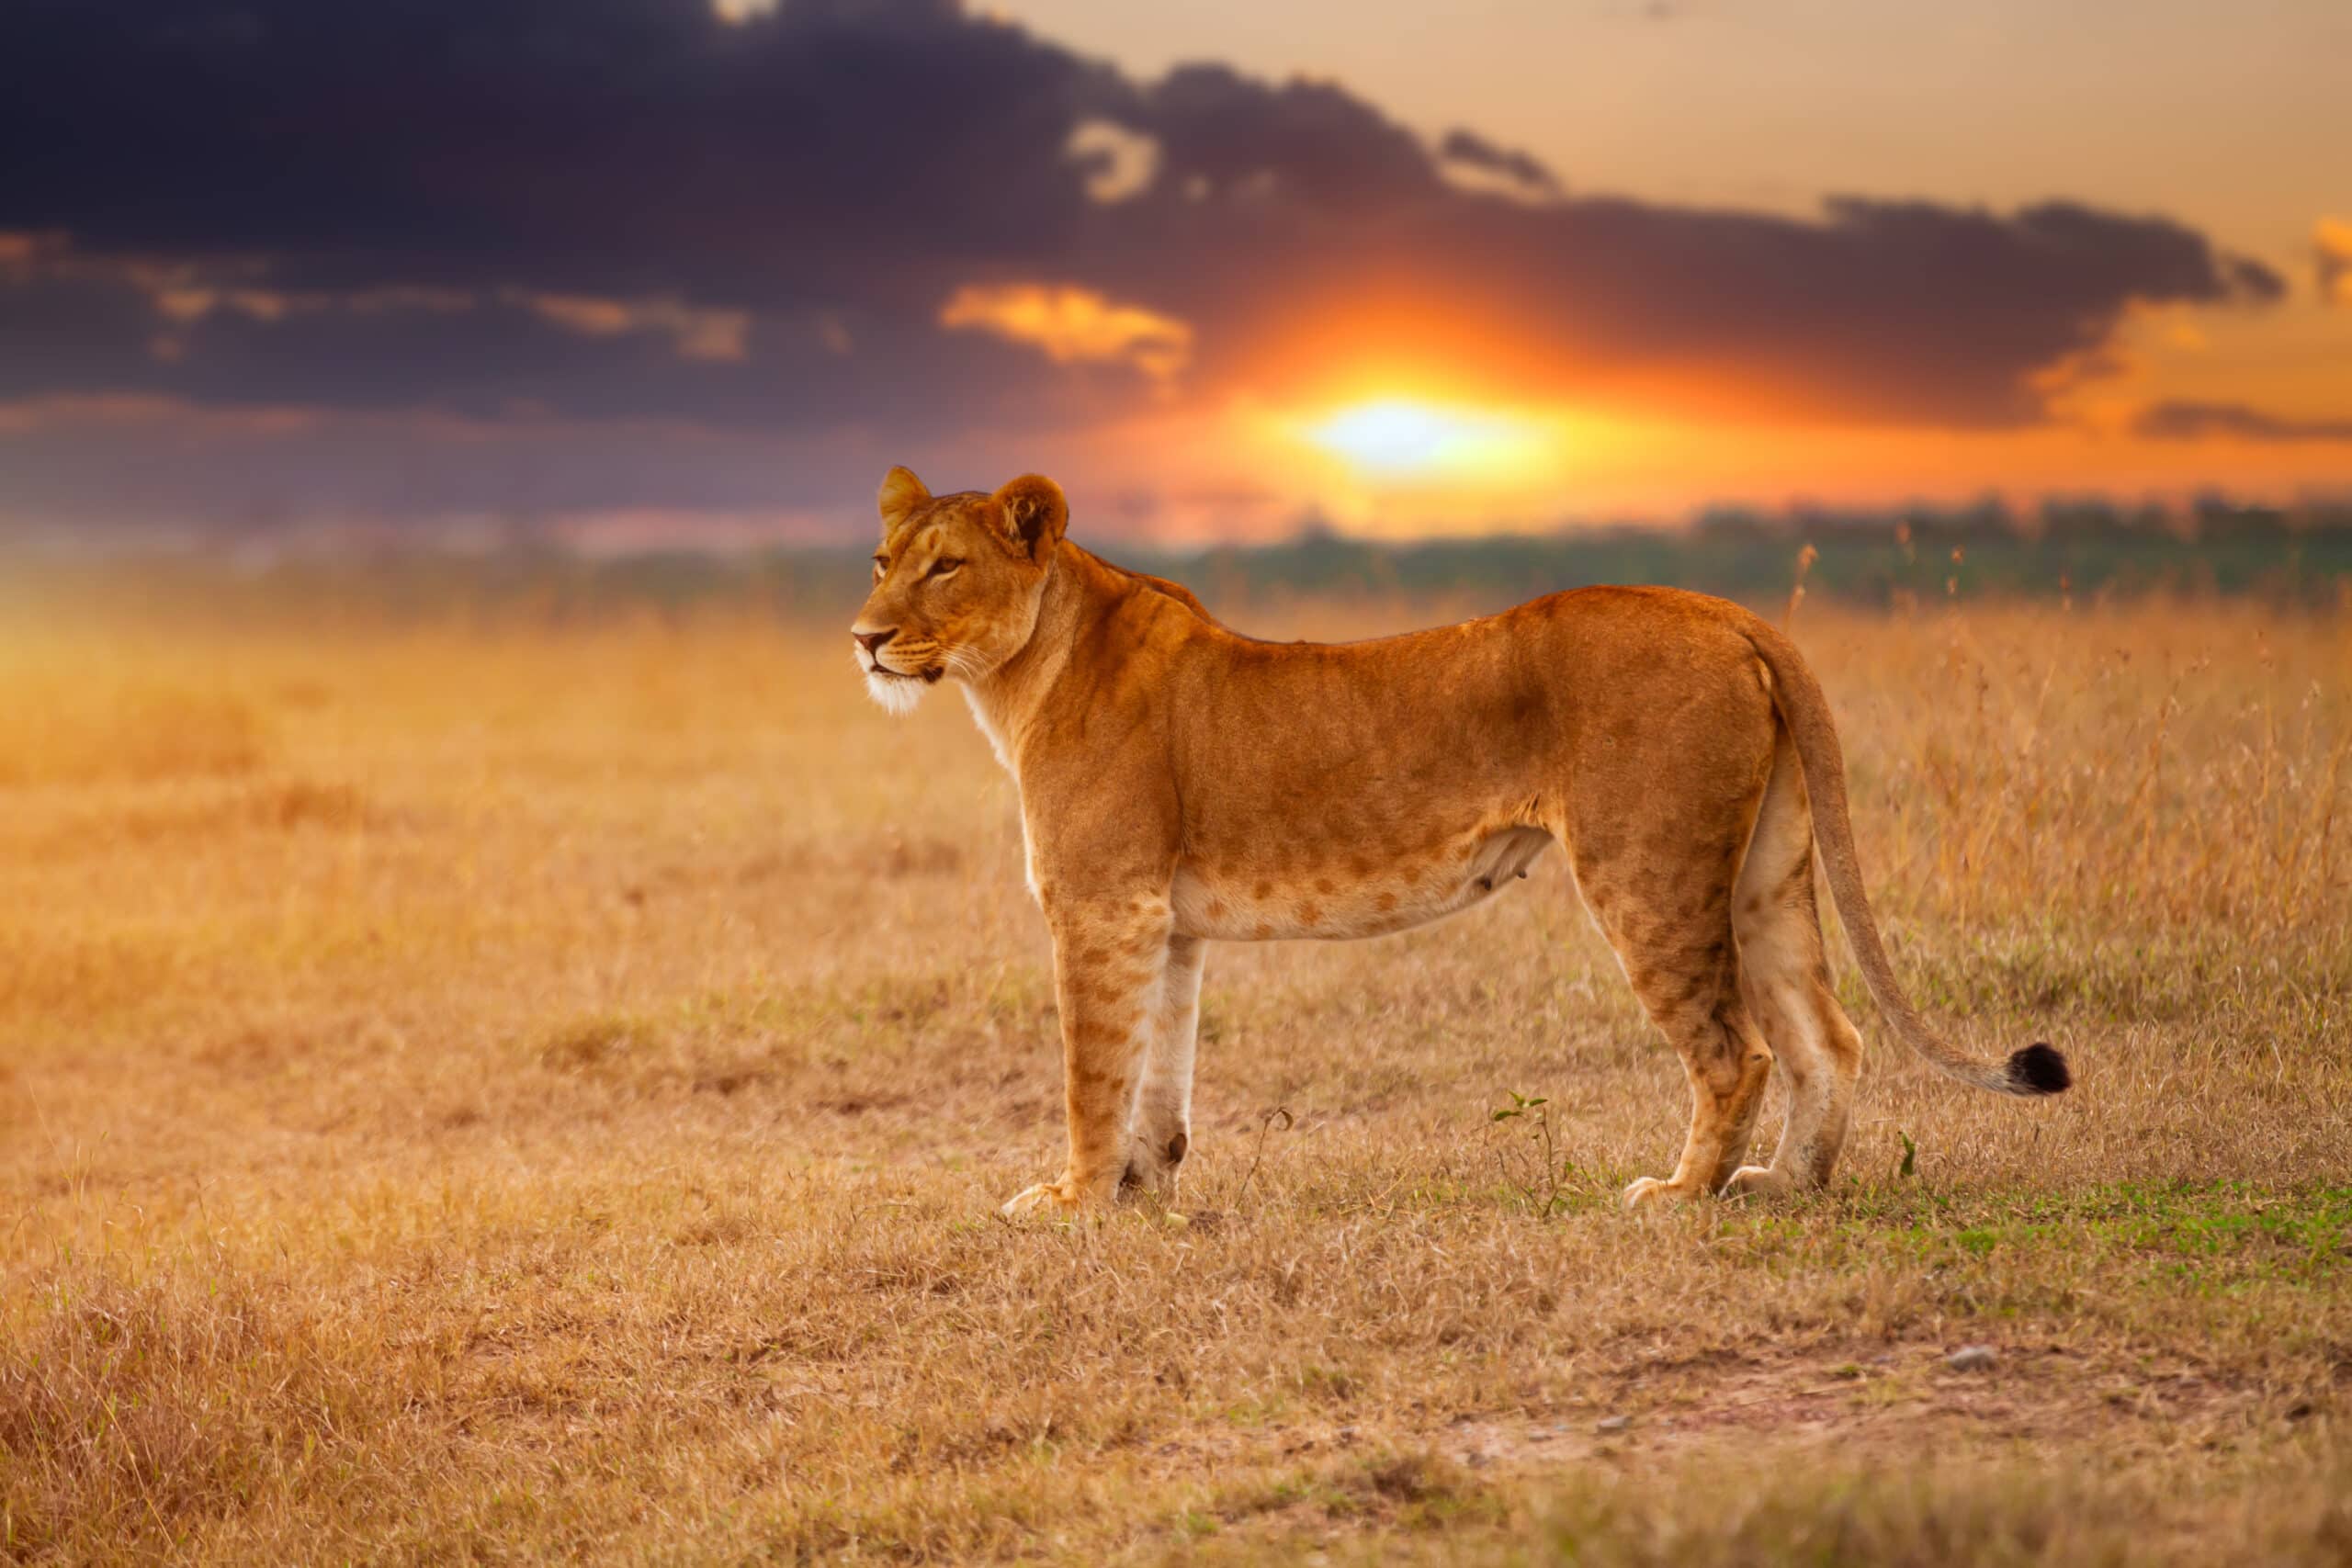 lioness in the african savanna at sunset kenya 2021 08 31 09 41 47 utc scaled